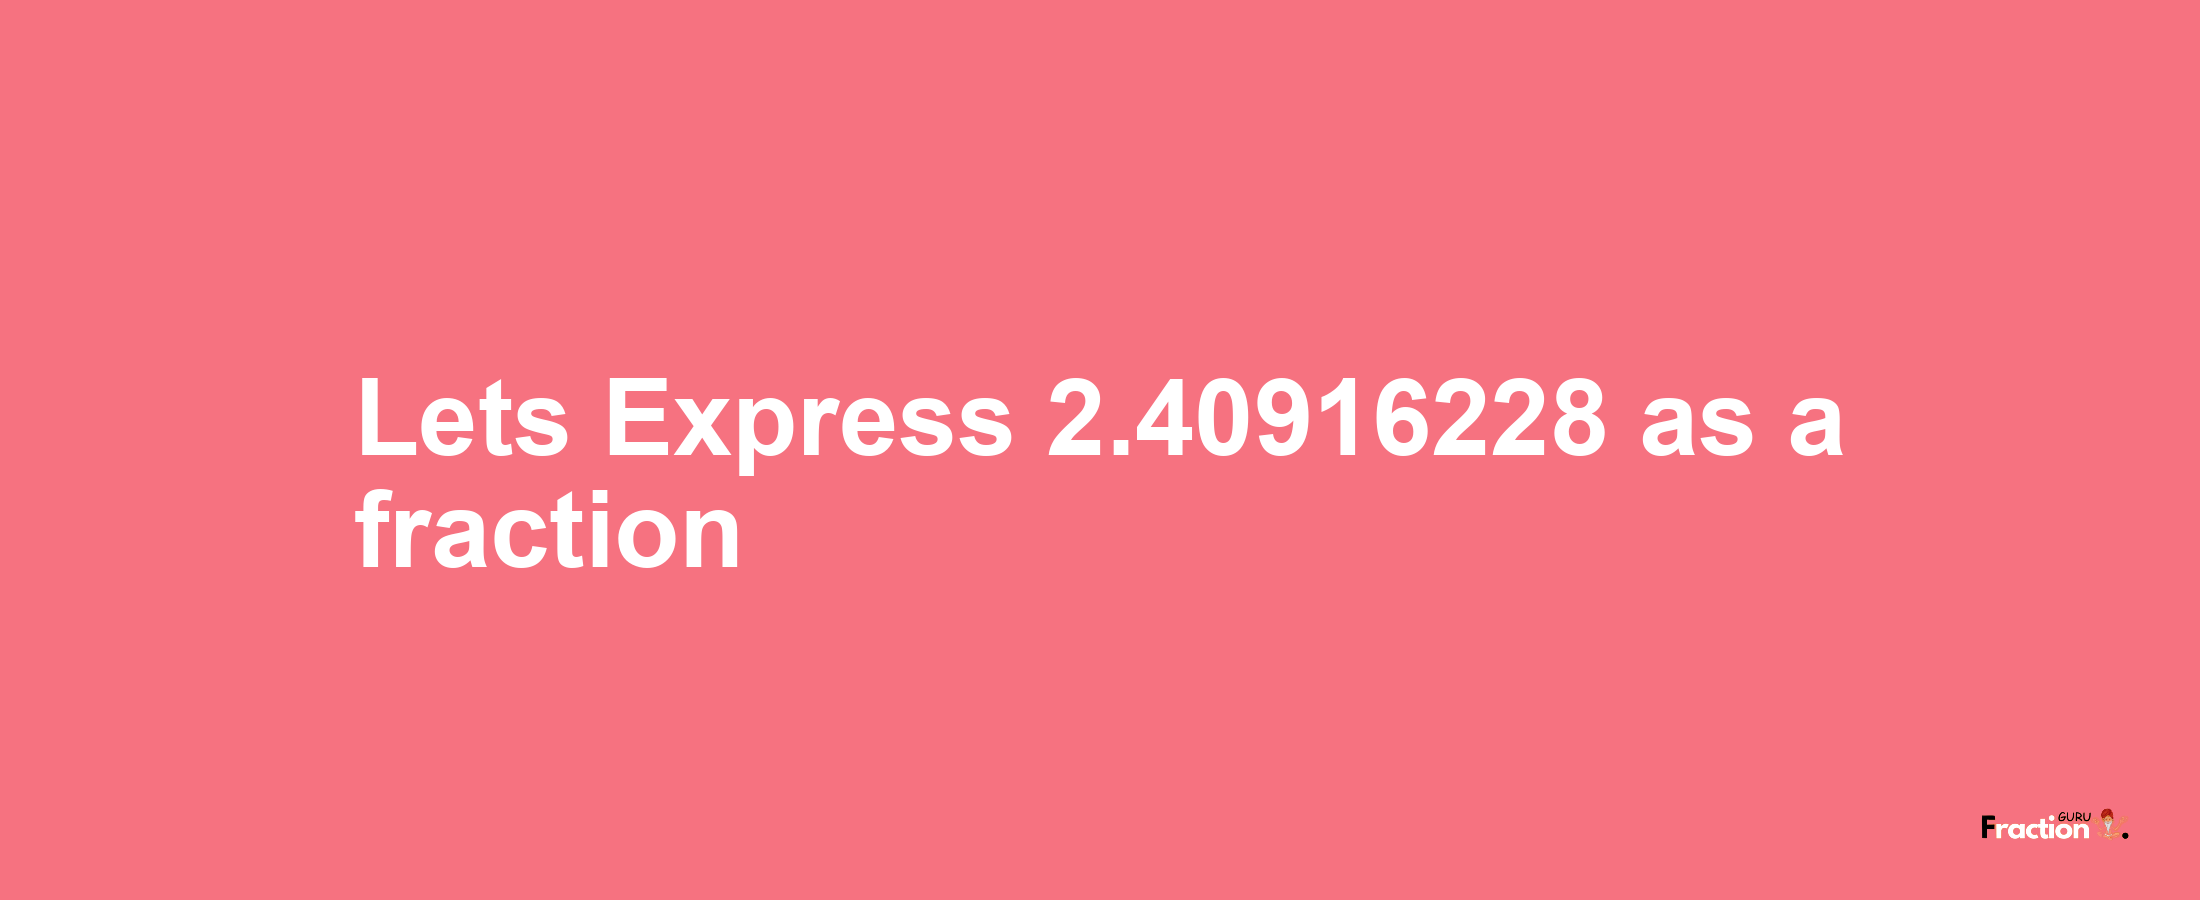 Lets Express 2.40916228 as afraction